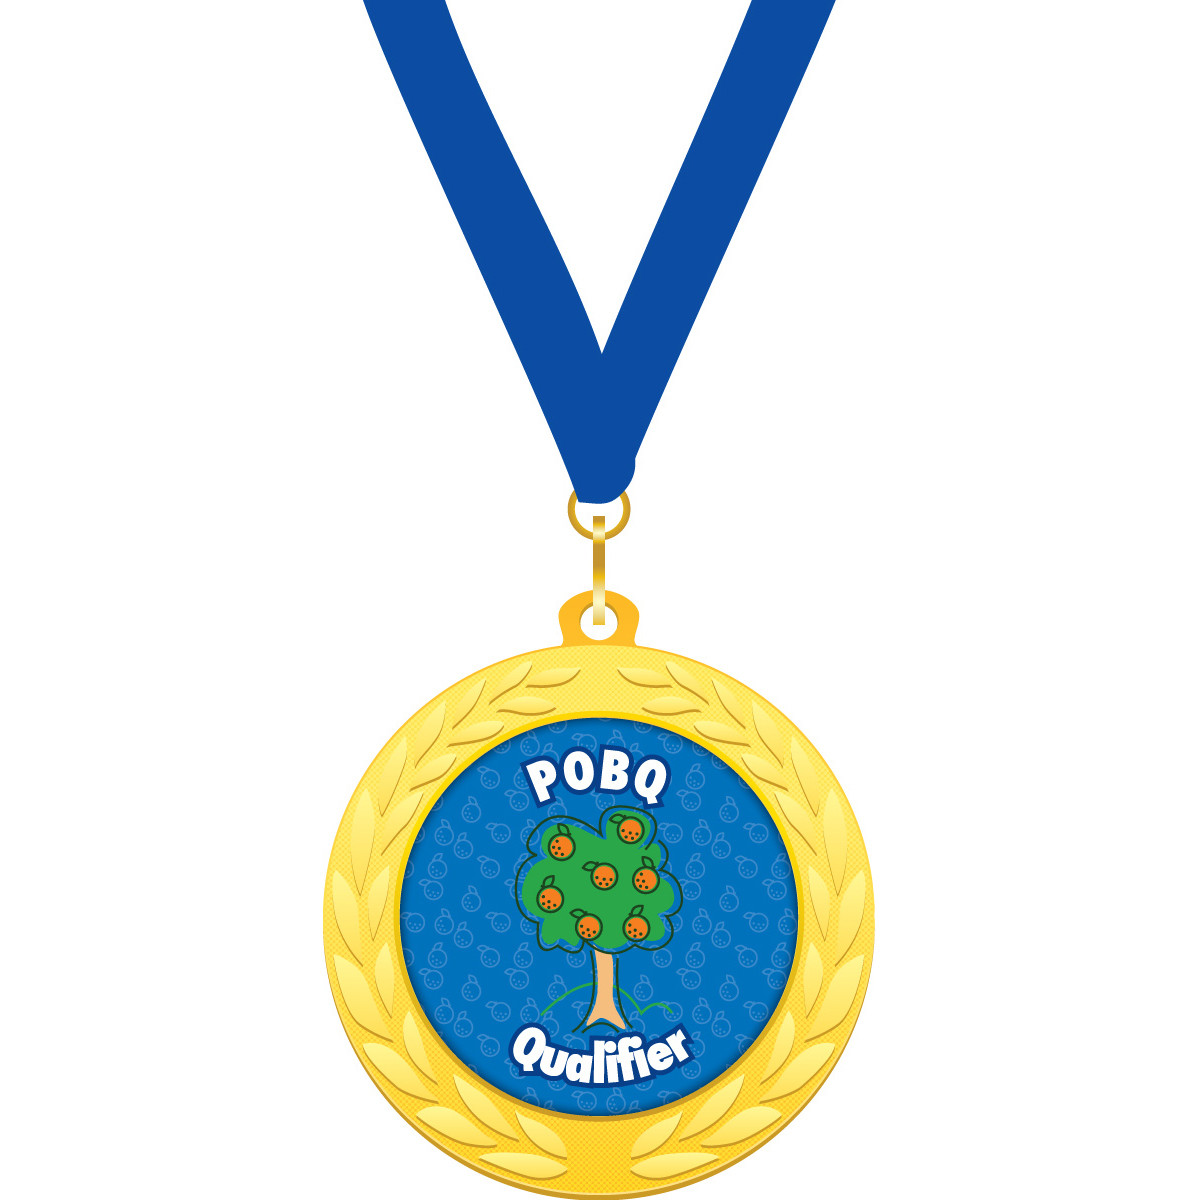 Custom 2 in. Gold Medallion with Blue Neck Ribbon (POBQ Qualifier)